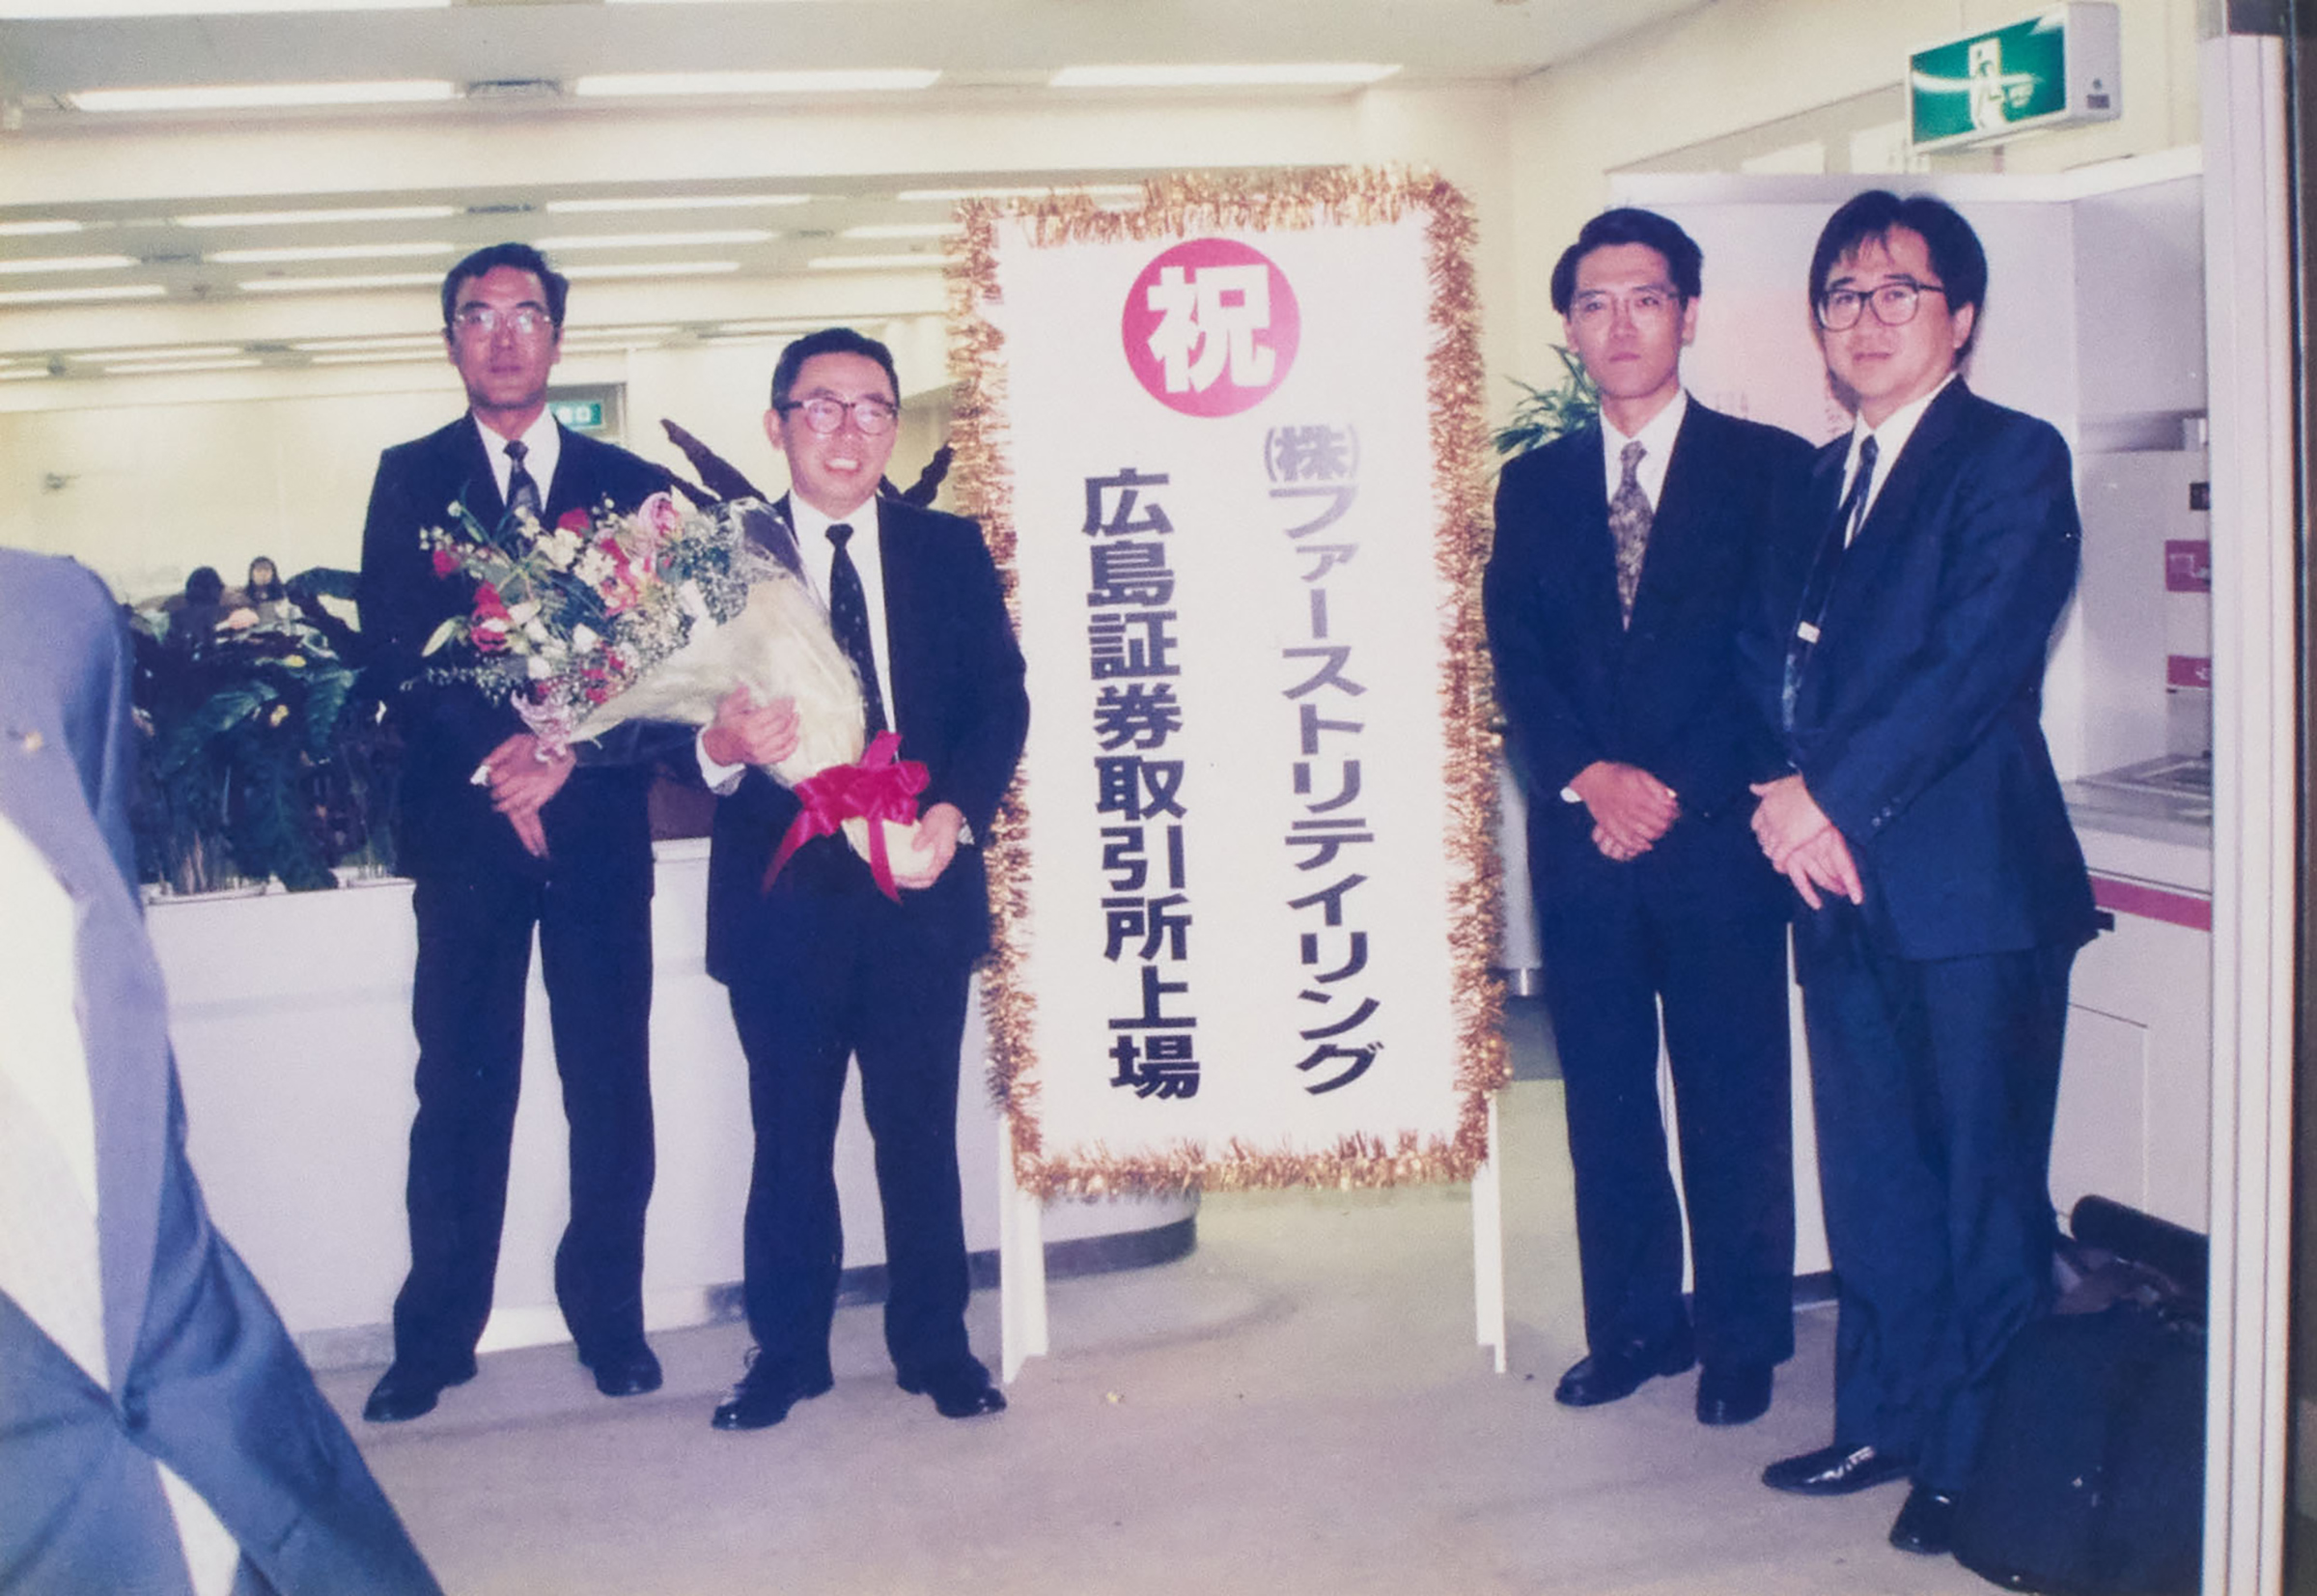 Yanai, second from left, at the initial public offering of Fast?Retailing in 1994. The opening price fixed at 14,900 yen. (Courtesy Uniqlo)